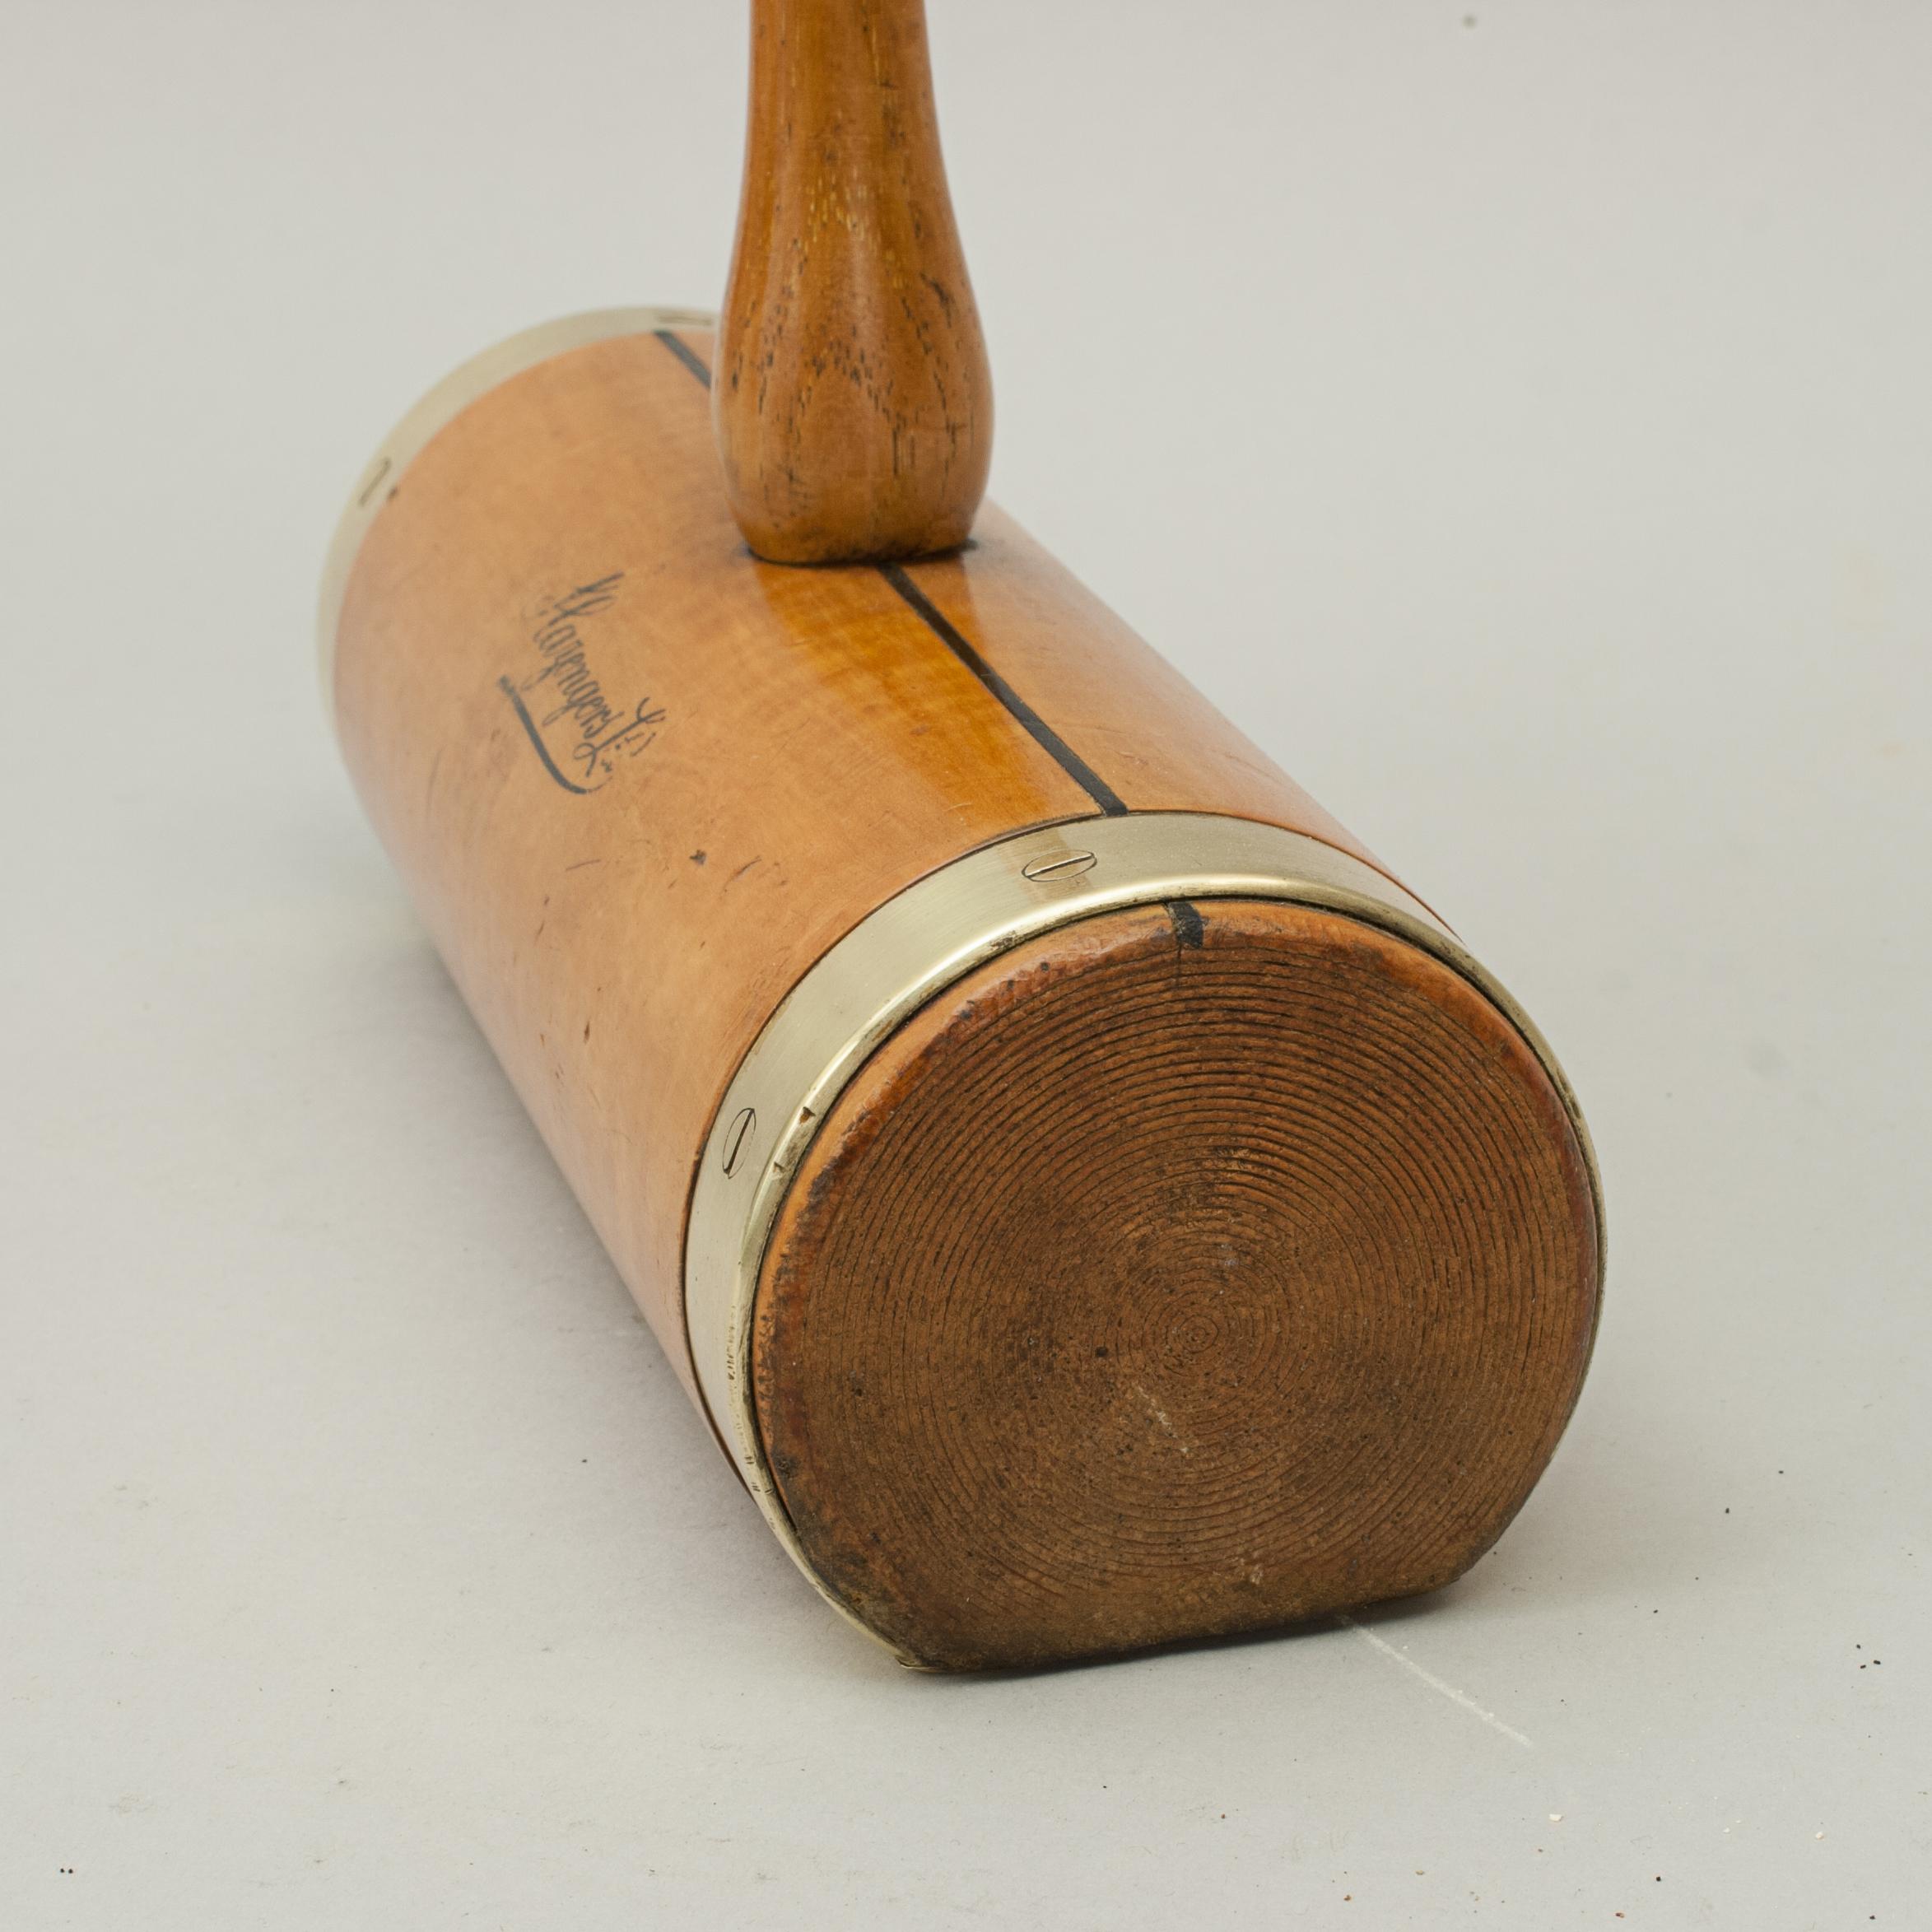 Antique Slazenger 'Corbally' Flat Bottom Croquet Mallet.
A fine usable flat bottom croquet mallet by Slazenger with brass plate to the bottom with brass reinforcing rings on the ends of the boxwood head, these add weight while helping protect the